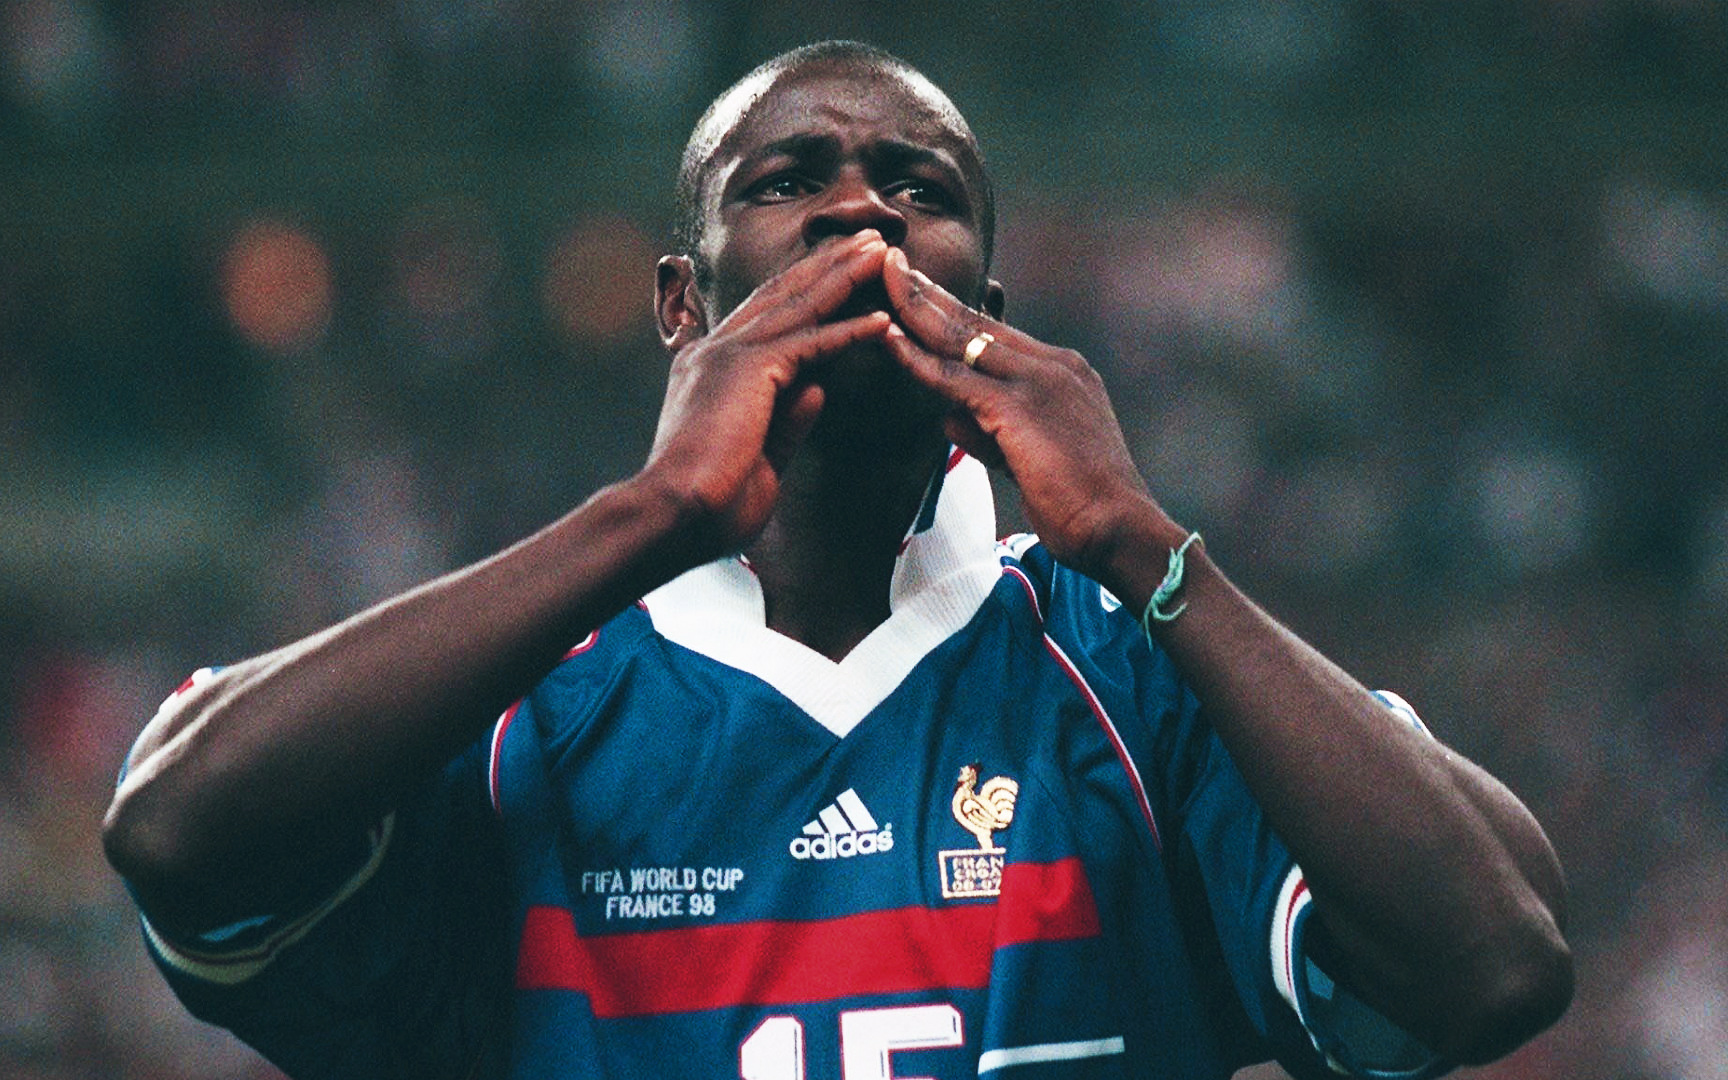 How the evergreen Lilian Thuram rose from nothing to become the world's best right-back